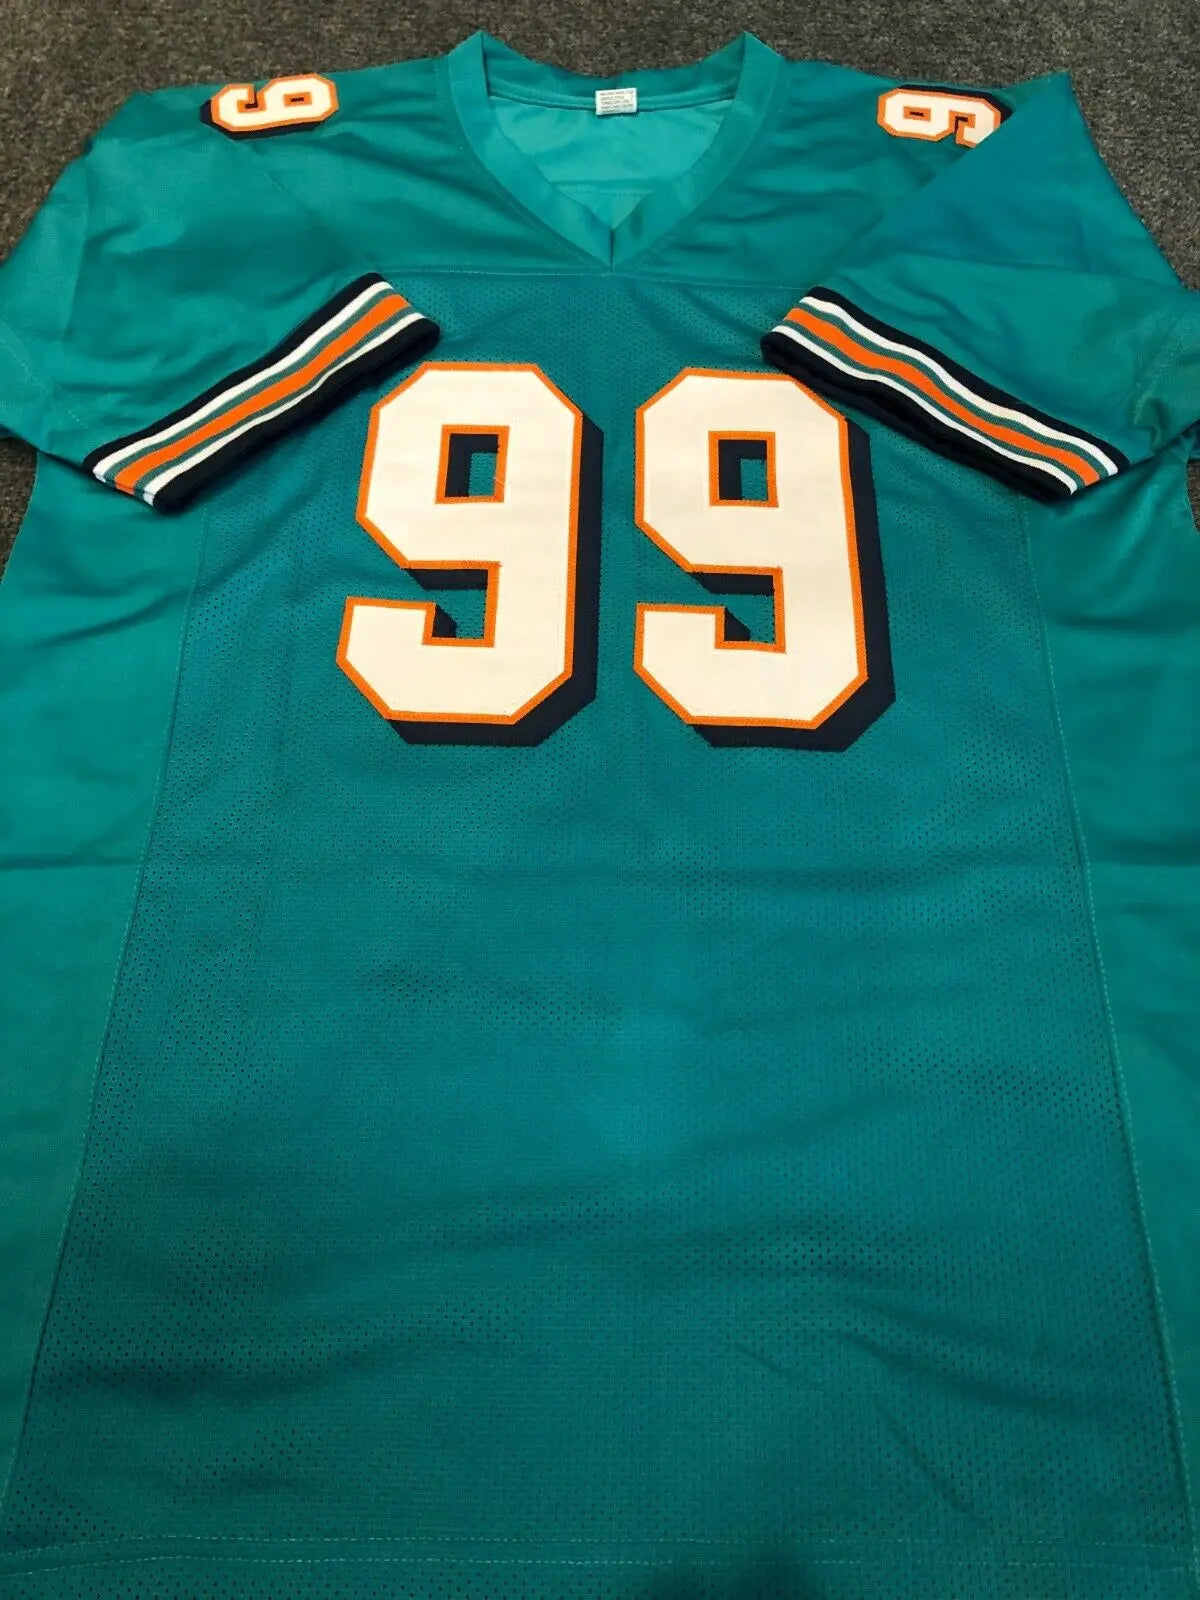 miami dolphins taylor jersey